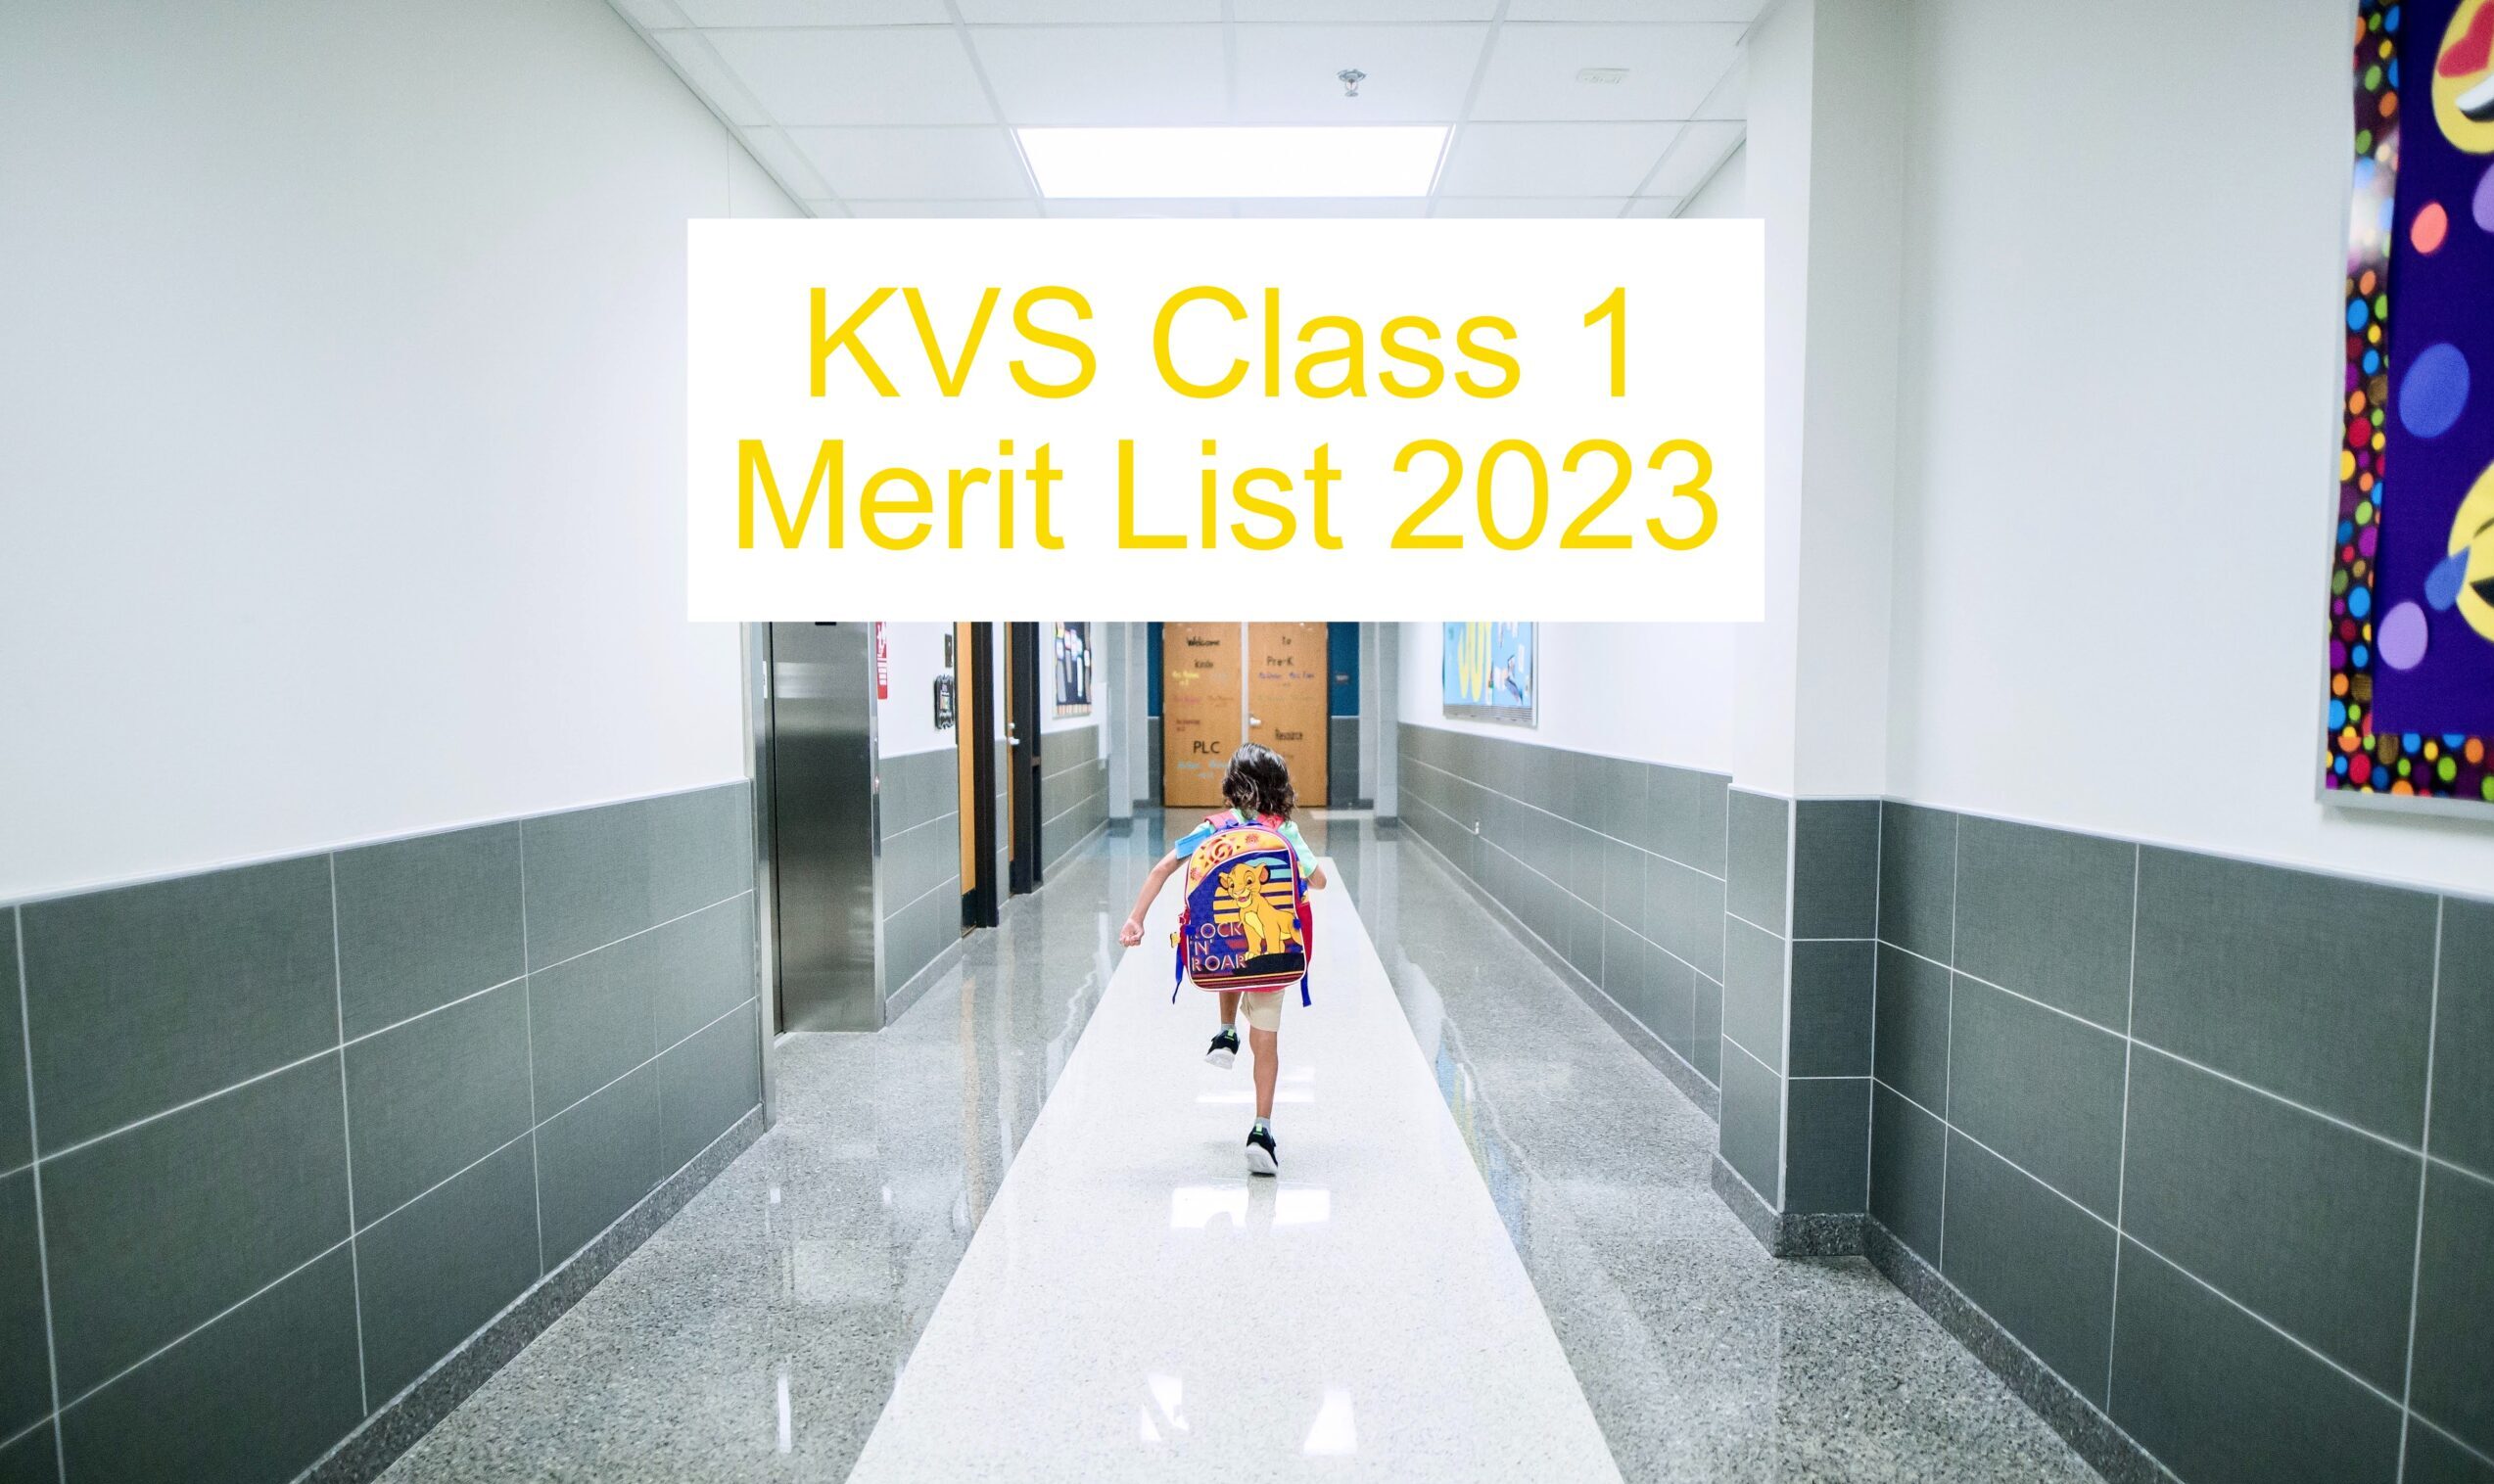 You are currently viewing KVS Class 1 Merit List 2023: First List Released on April 20, 2023